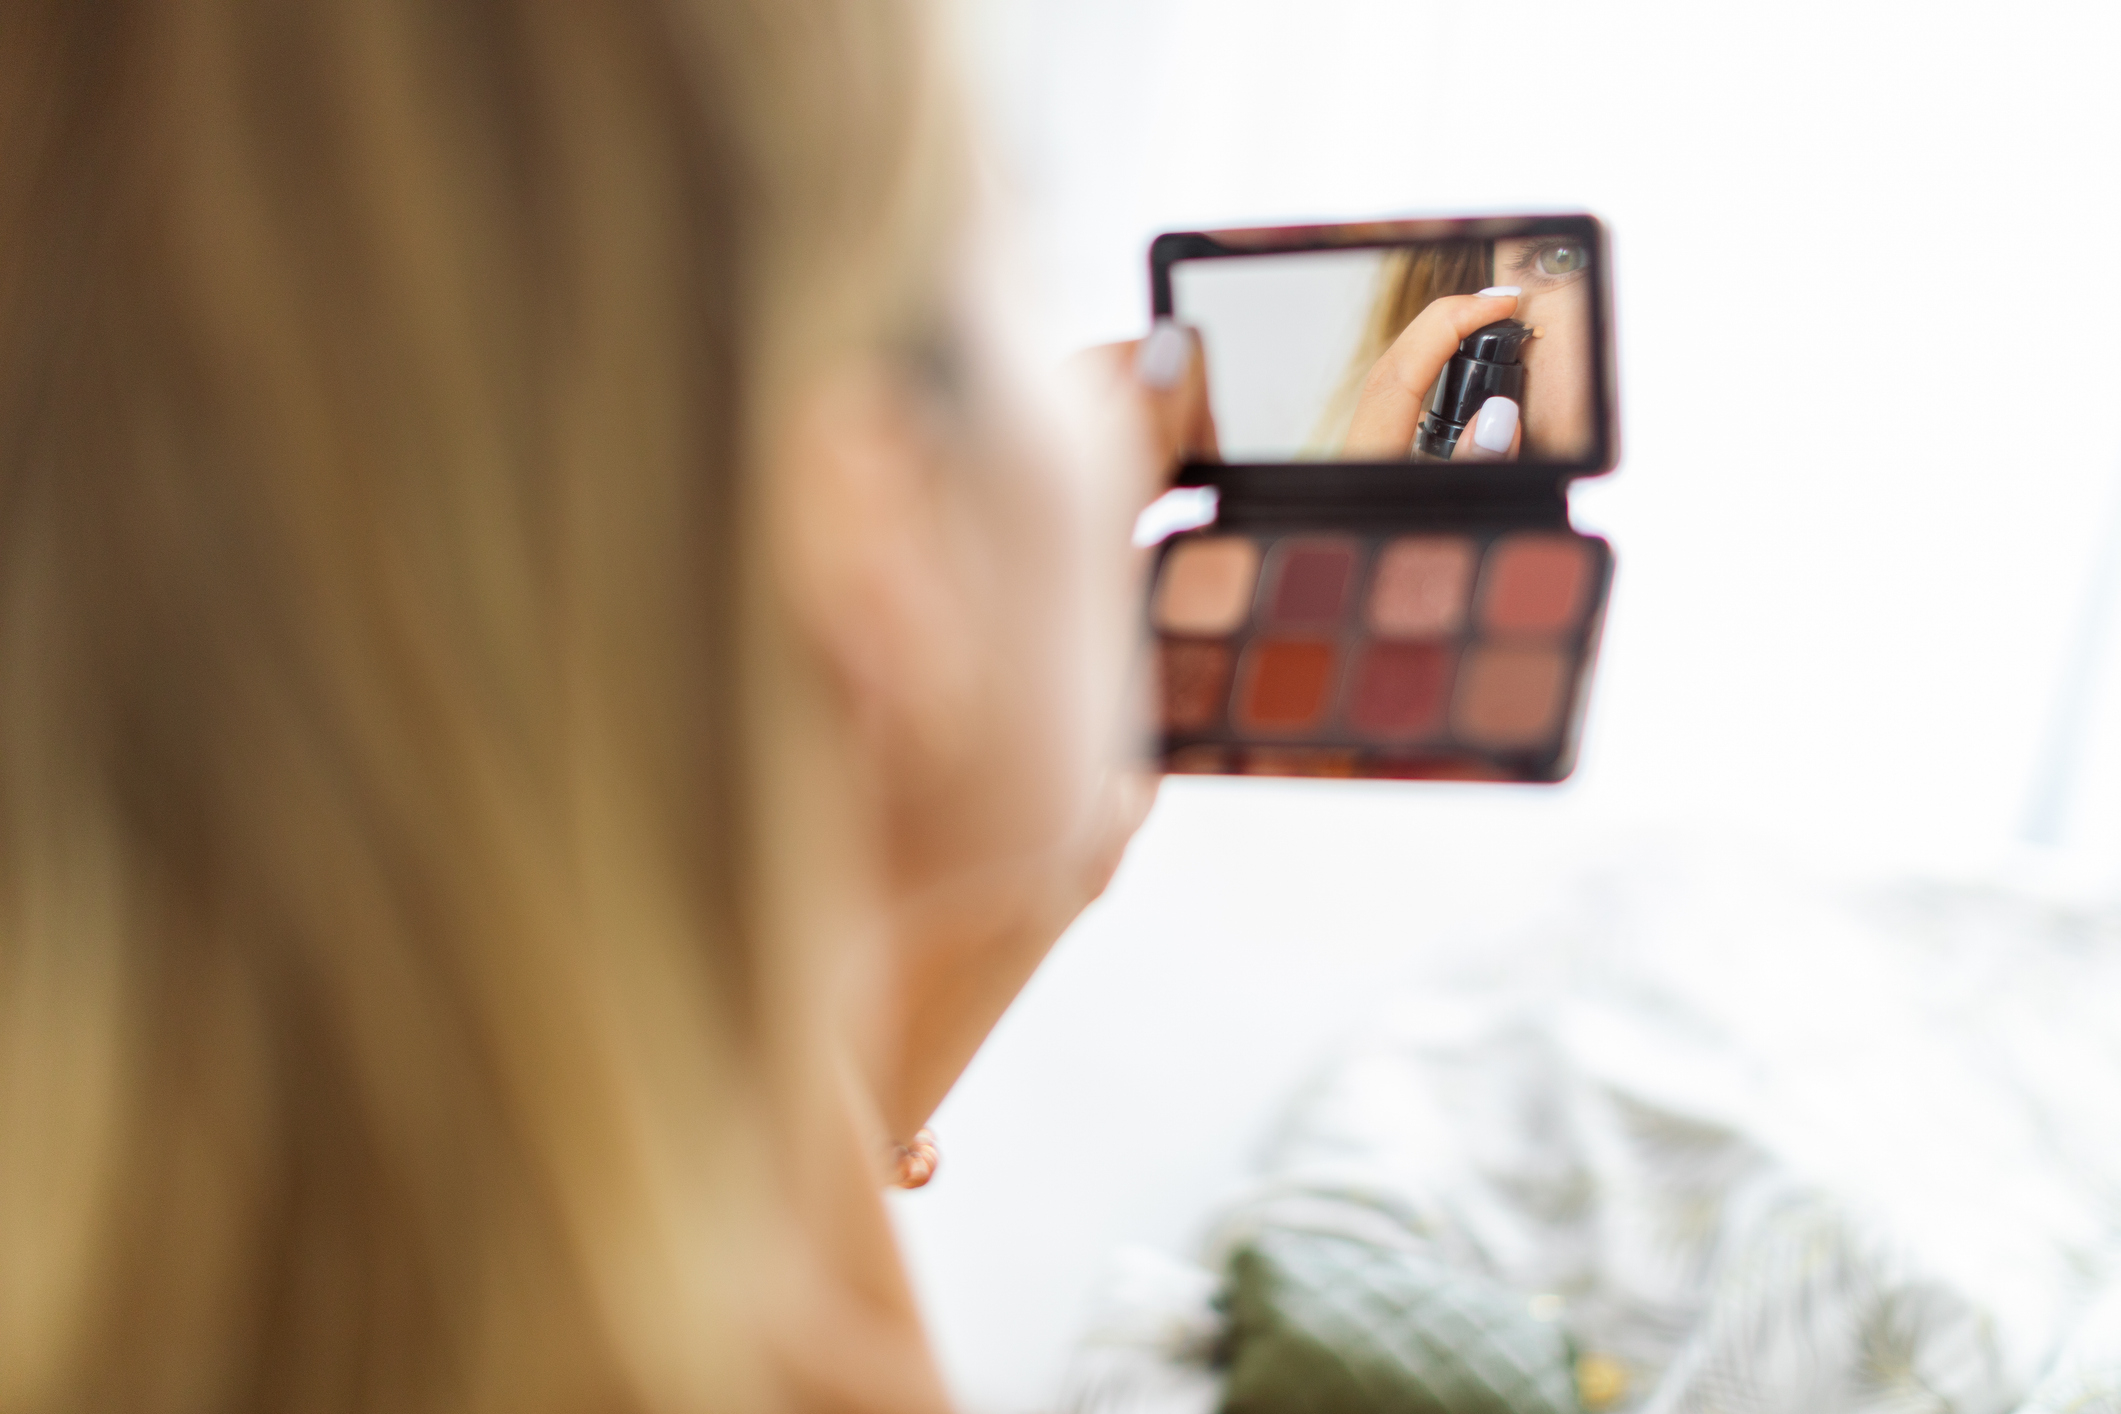 Woman looking into a handheld makeup palette mirror, applying eye shadow. (Personal names are not provided in the image.)